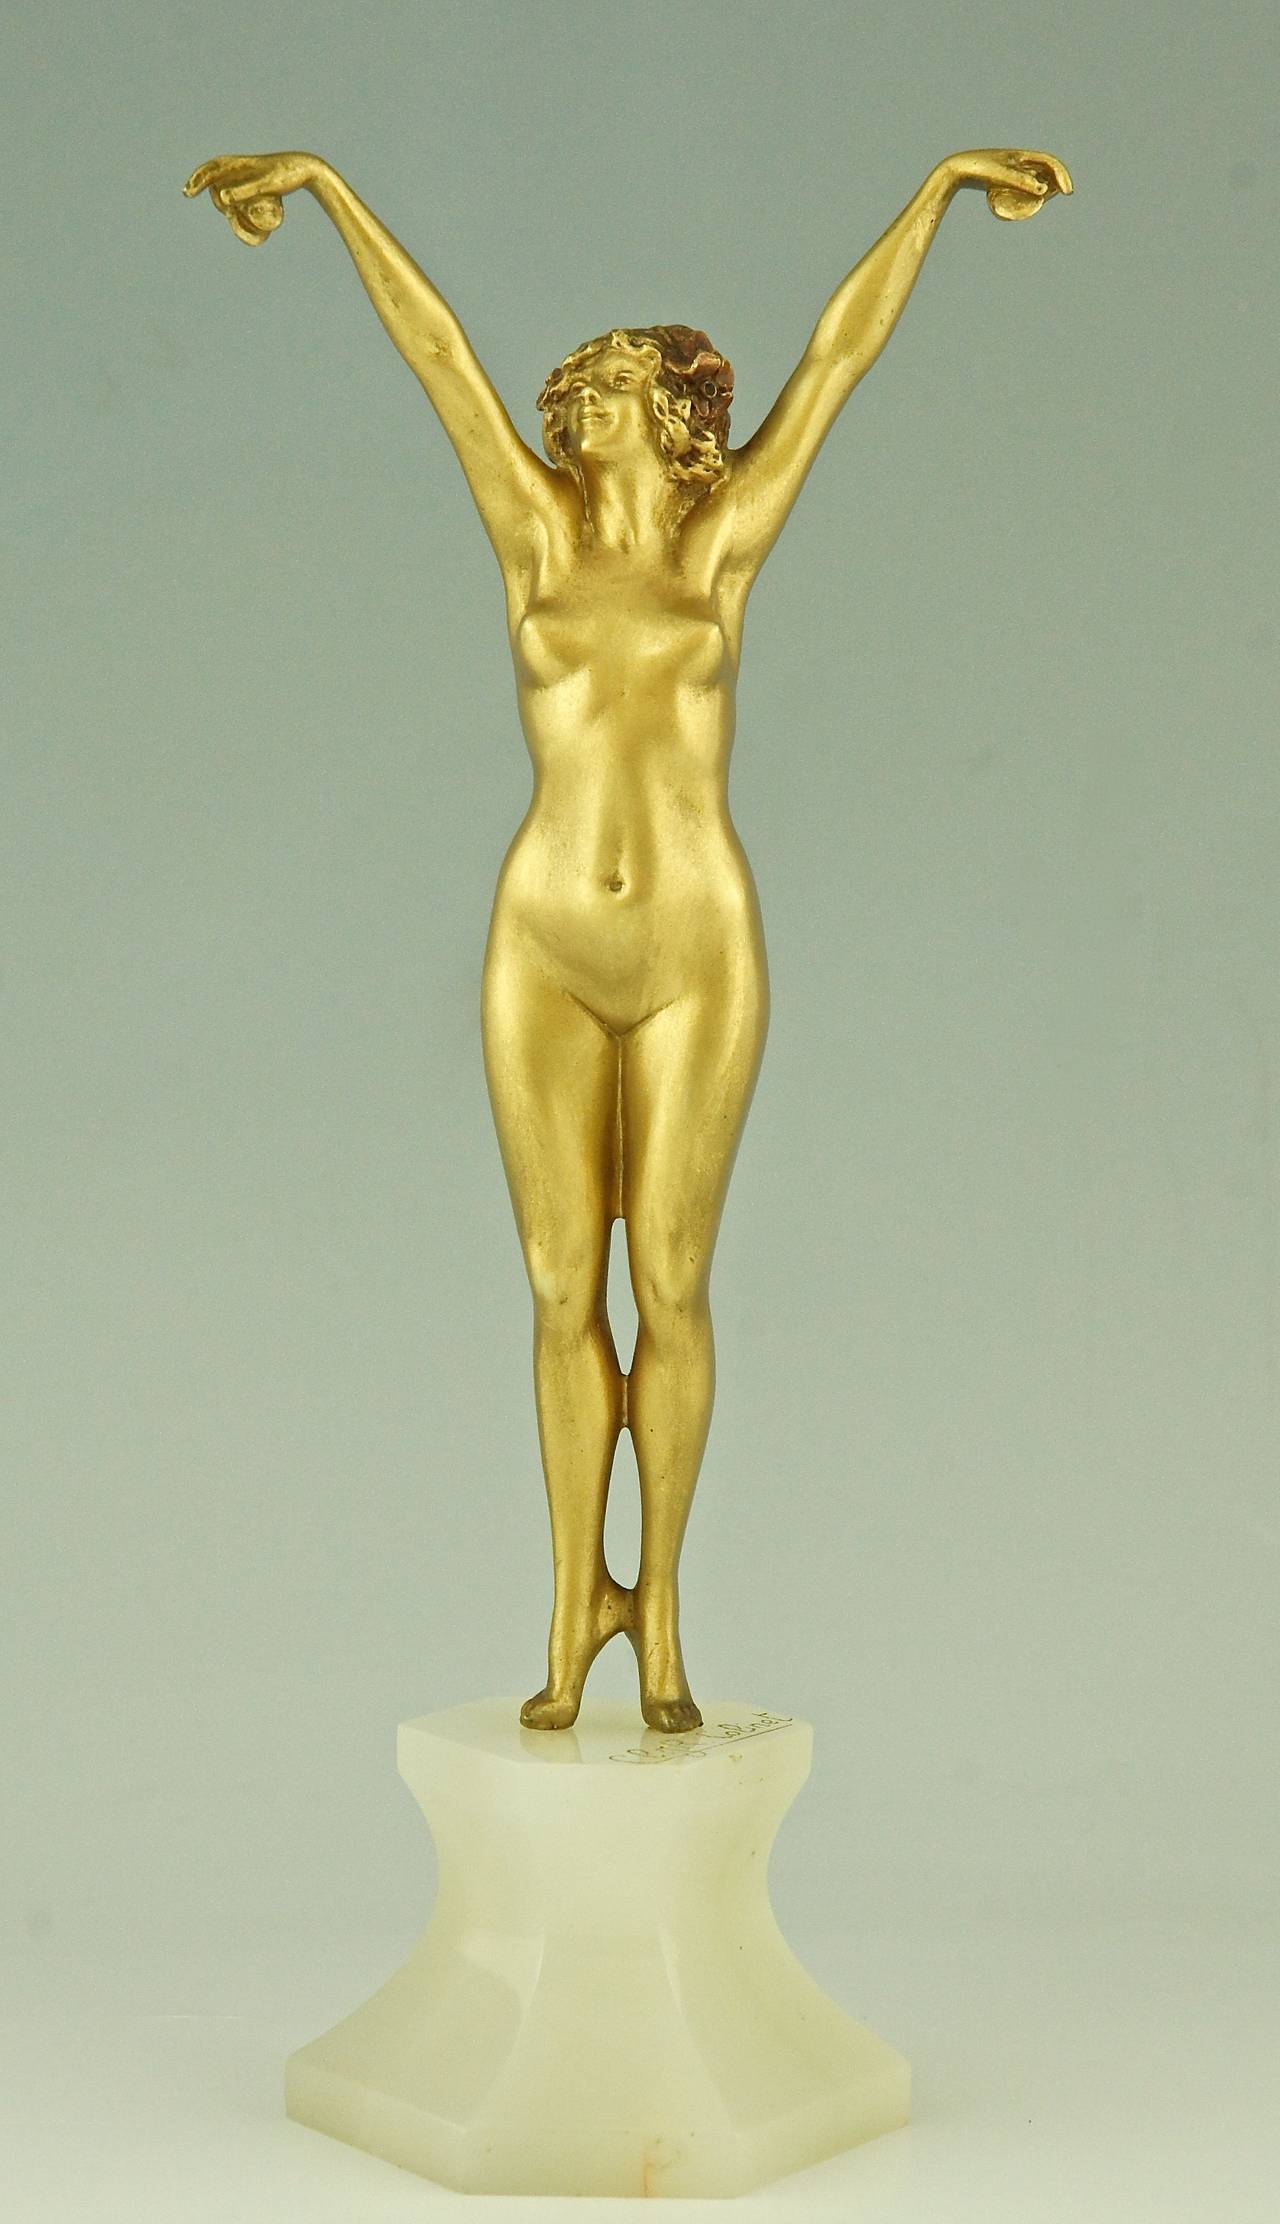 Andalusian, an Art Deco sculpture of a nude with castanets on an onyx base. 
By Claire Jeanne Roberte Colinet,  Belgian sculptress, worked in France. 
Signature or Marks: CL. J. R. Colinet.

Style:  Art Deco. 
Date:  1925. 
Material: Gilt